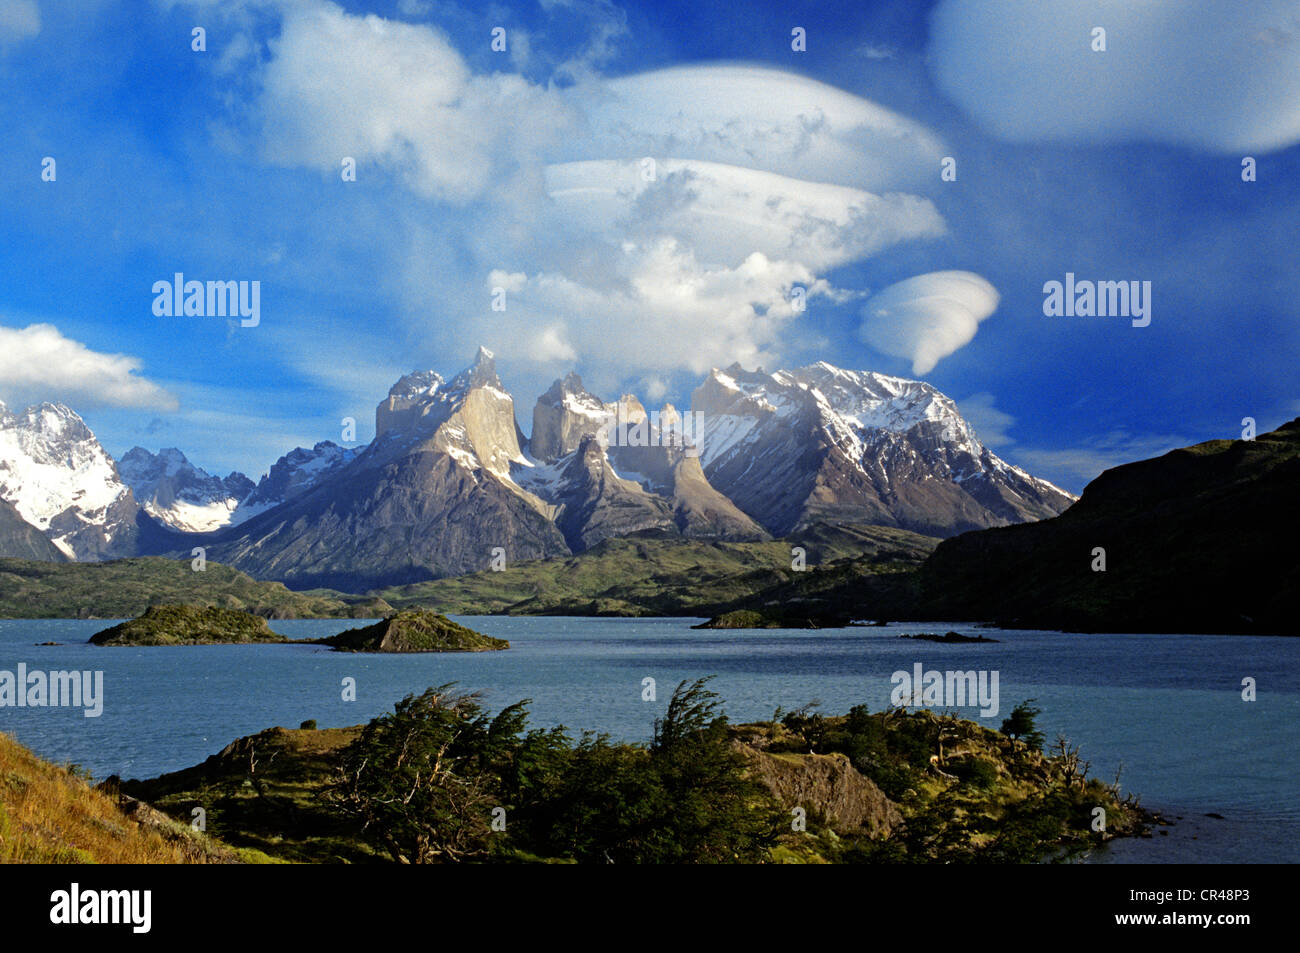 Chile, Magallanes and Antartica Chilena Region, Ultima Esperanza Province, Torres del paine National Park, Pehoe Lake and the Stock Photo